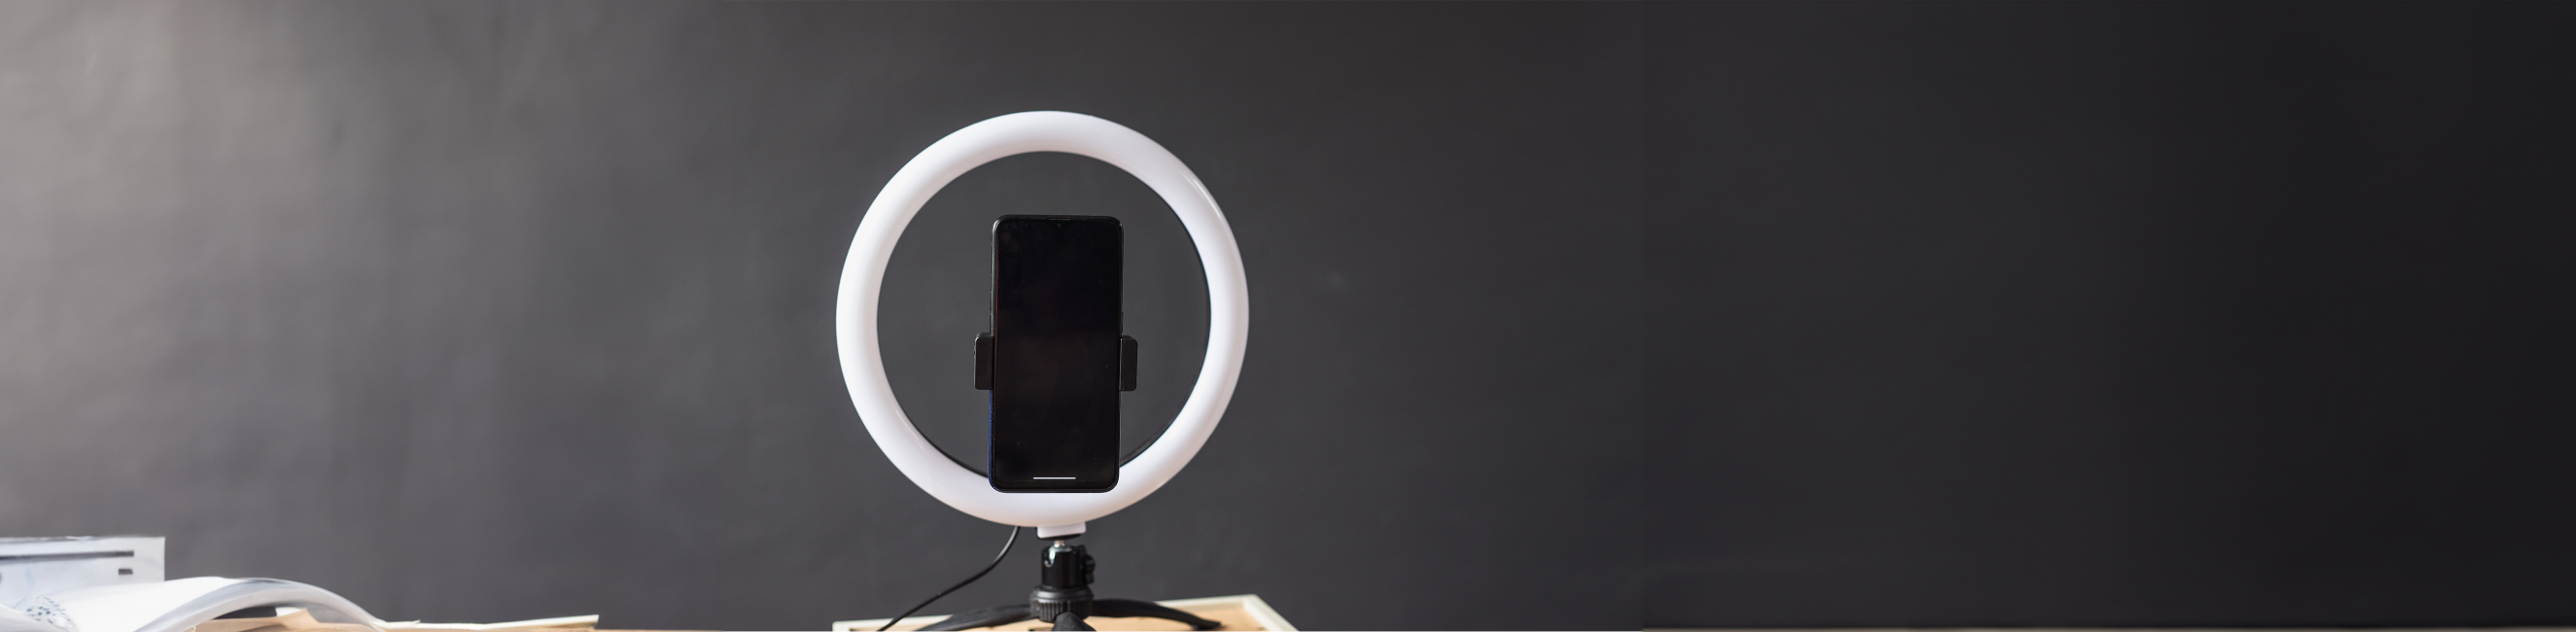 Smartphone with ringlight